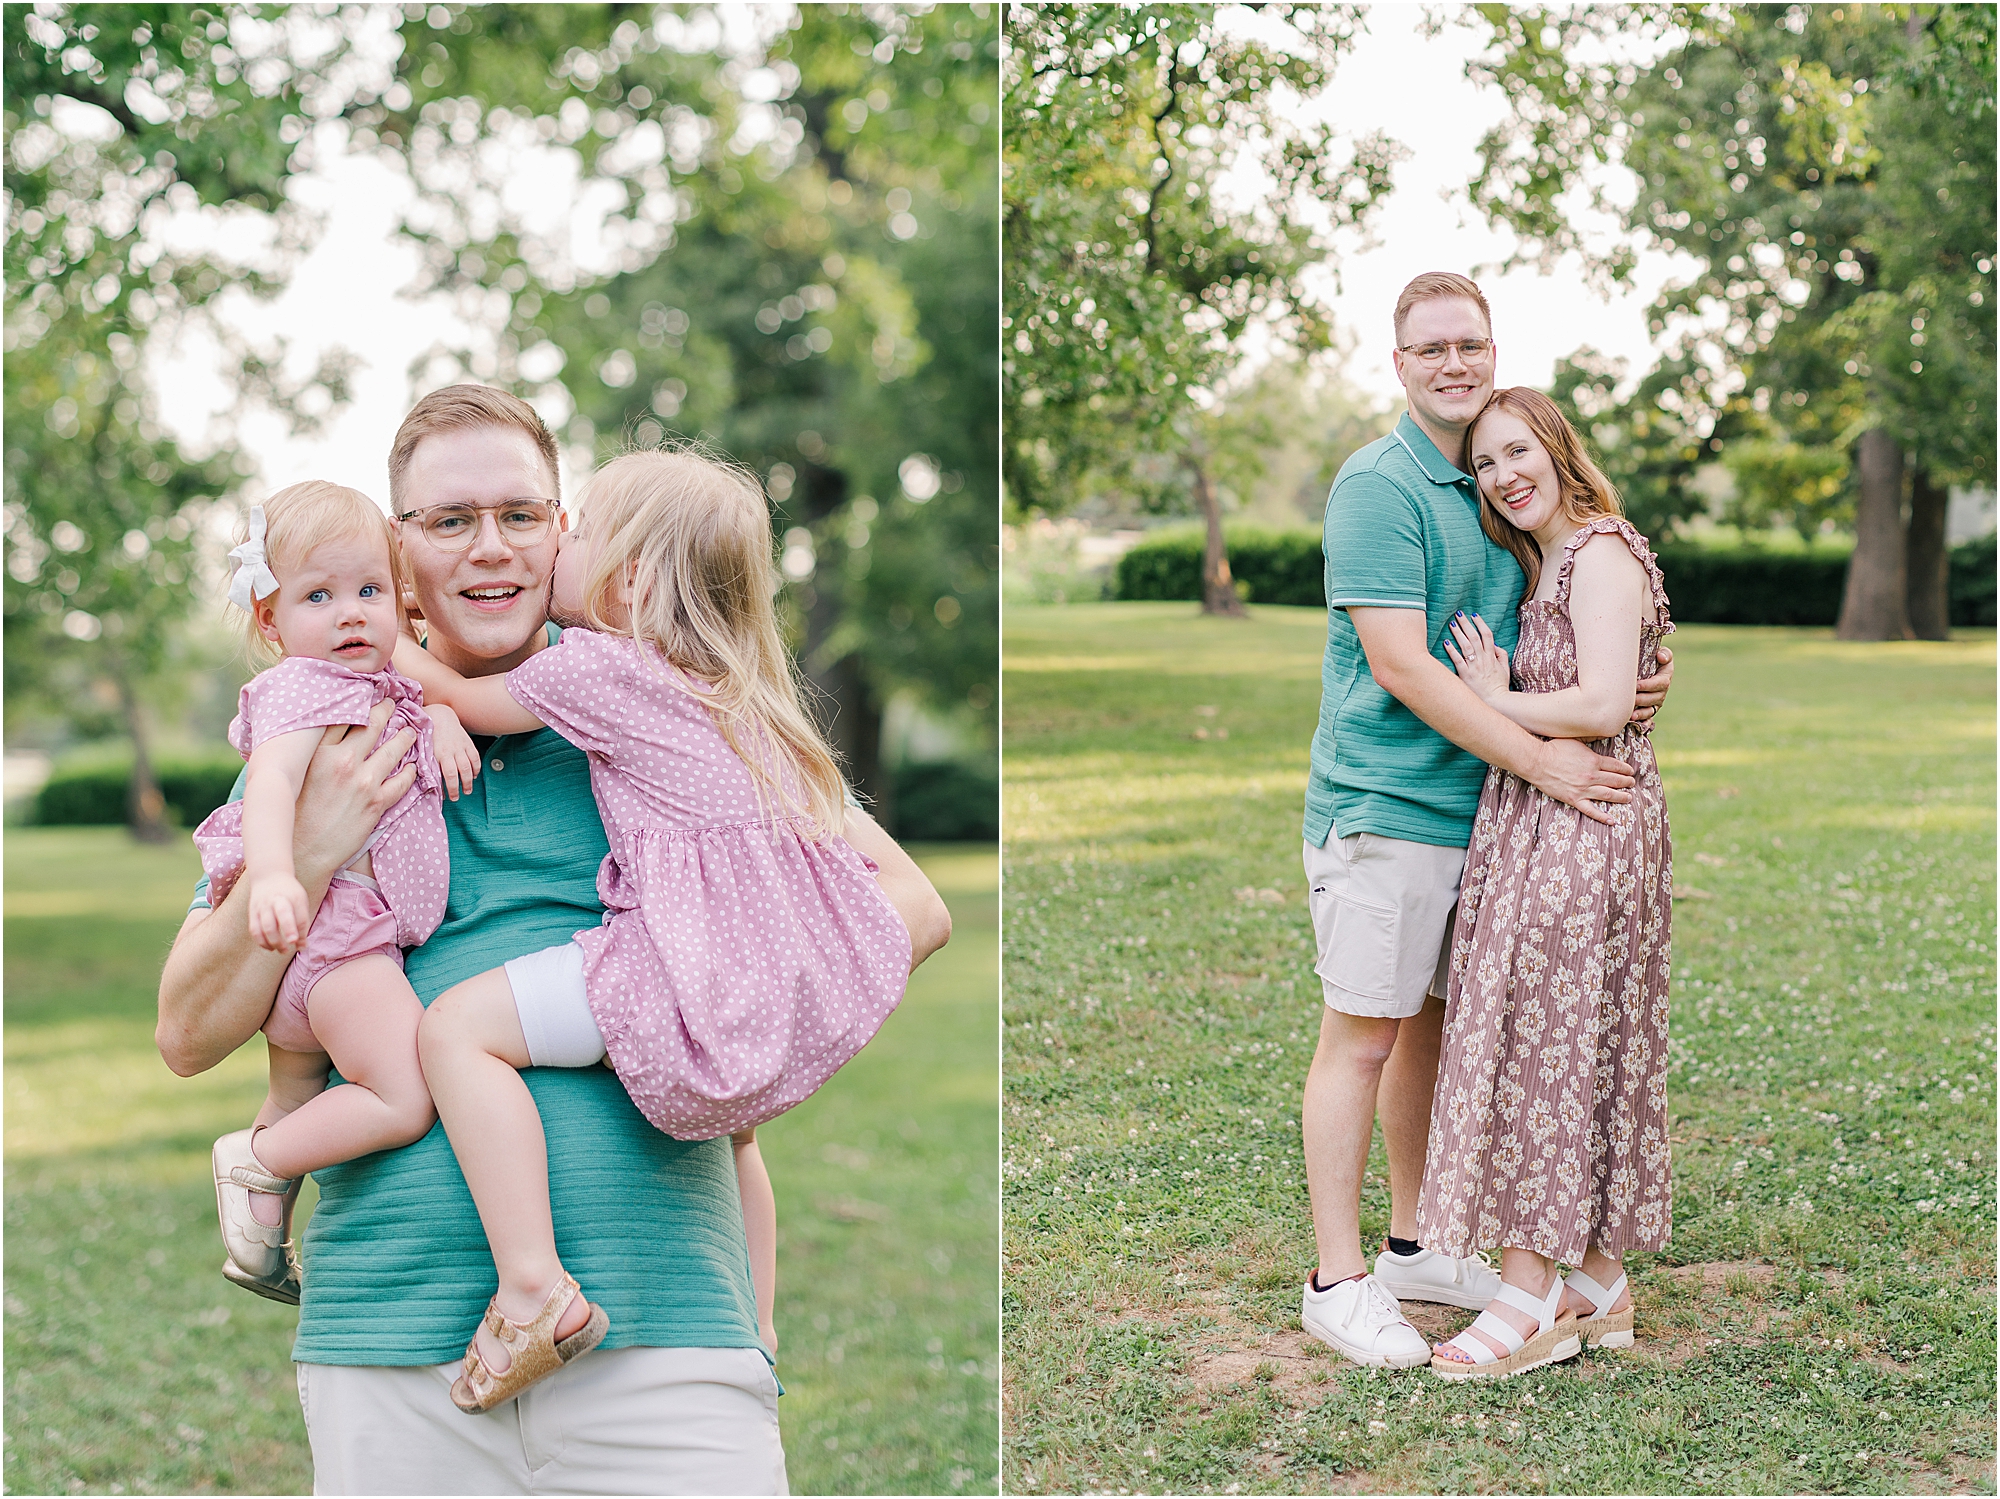 Daughters give their dad a kiss in the park at their summer family photo session.